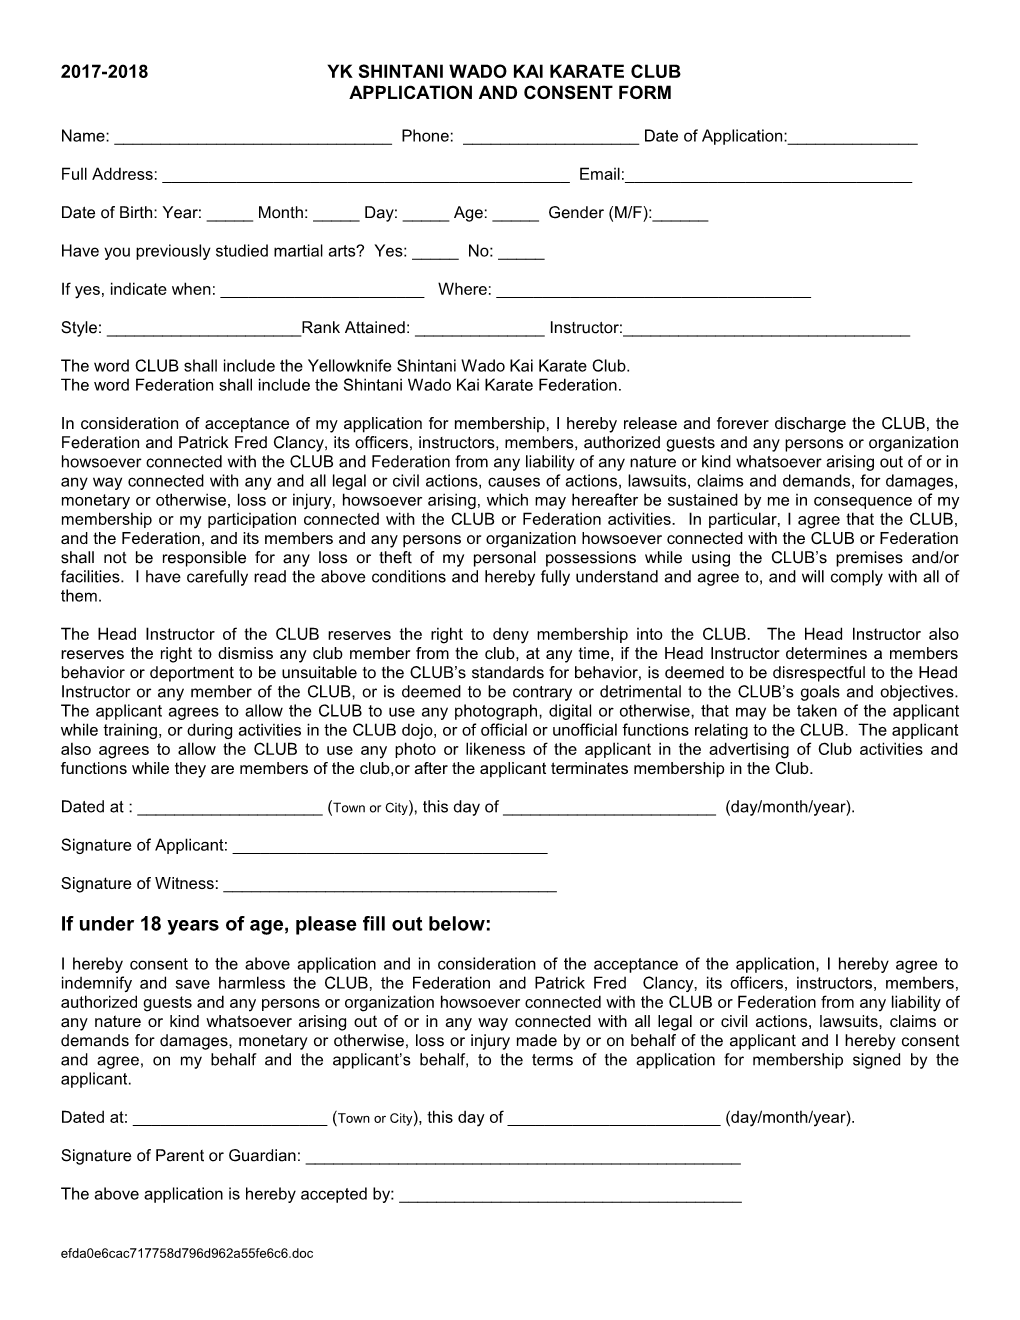 Application and Consent Form